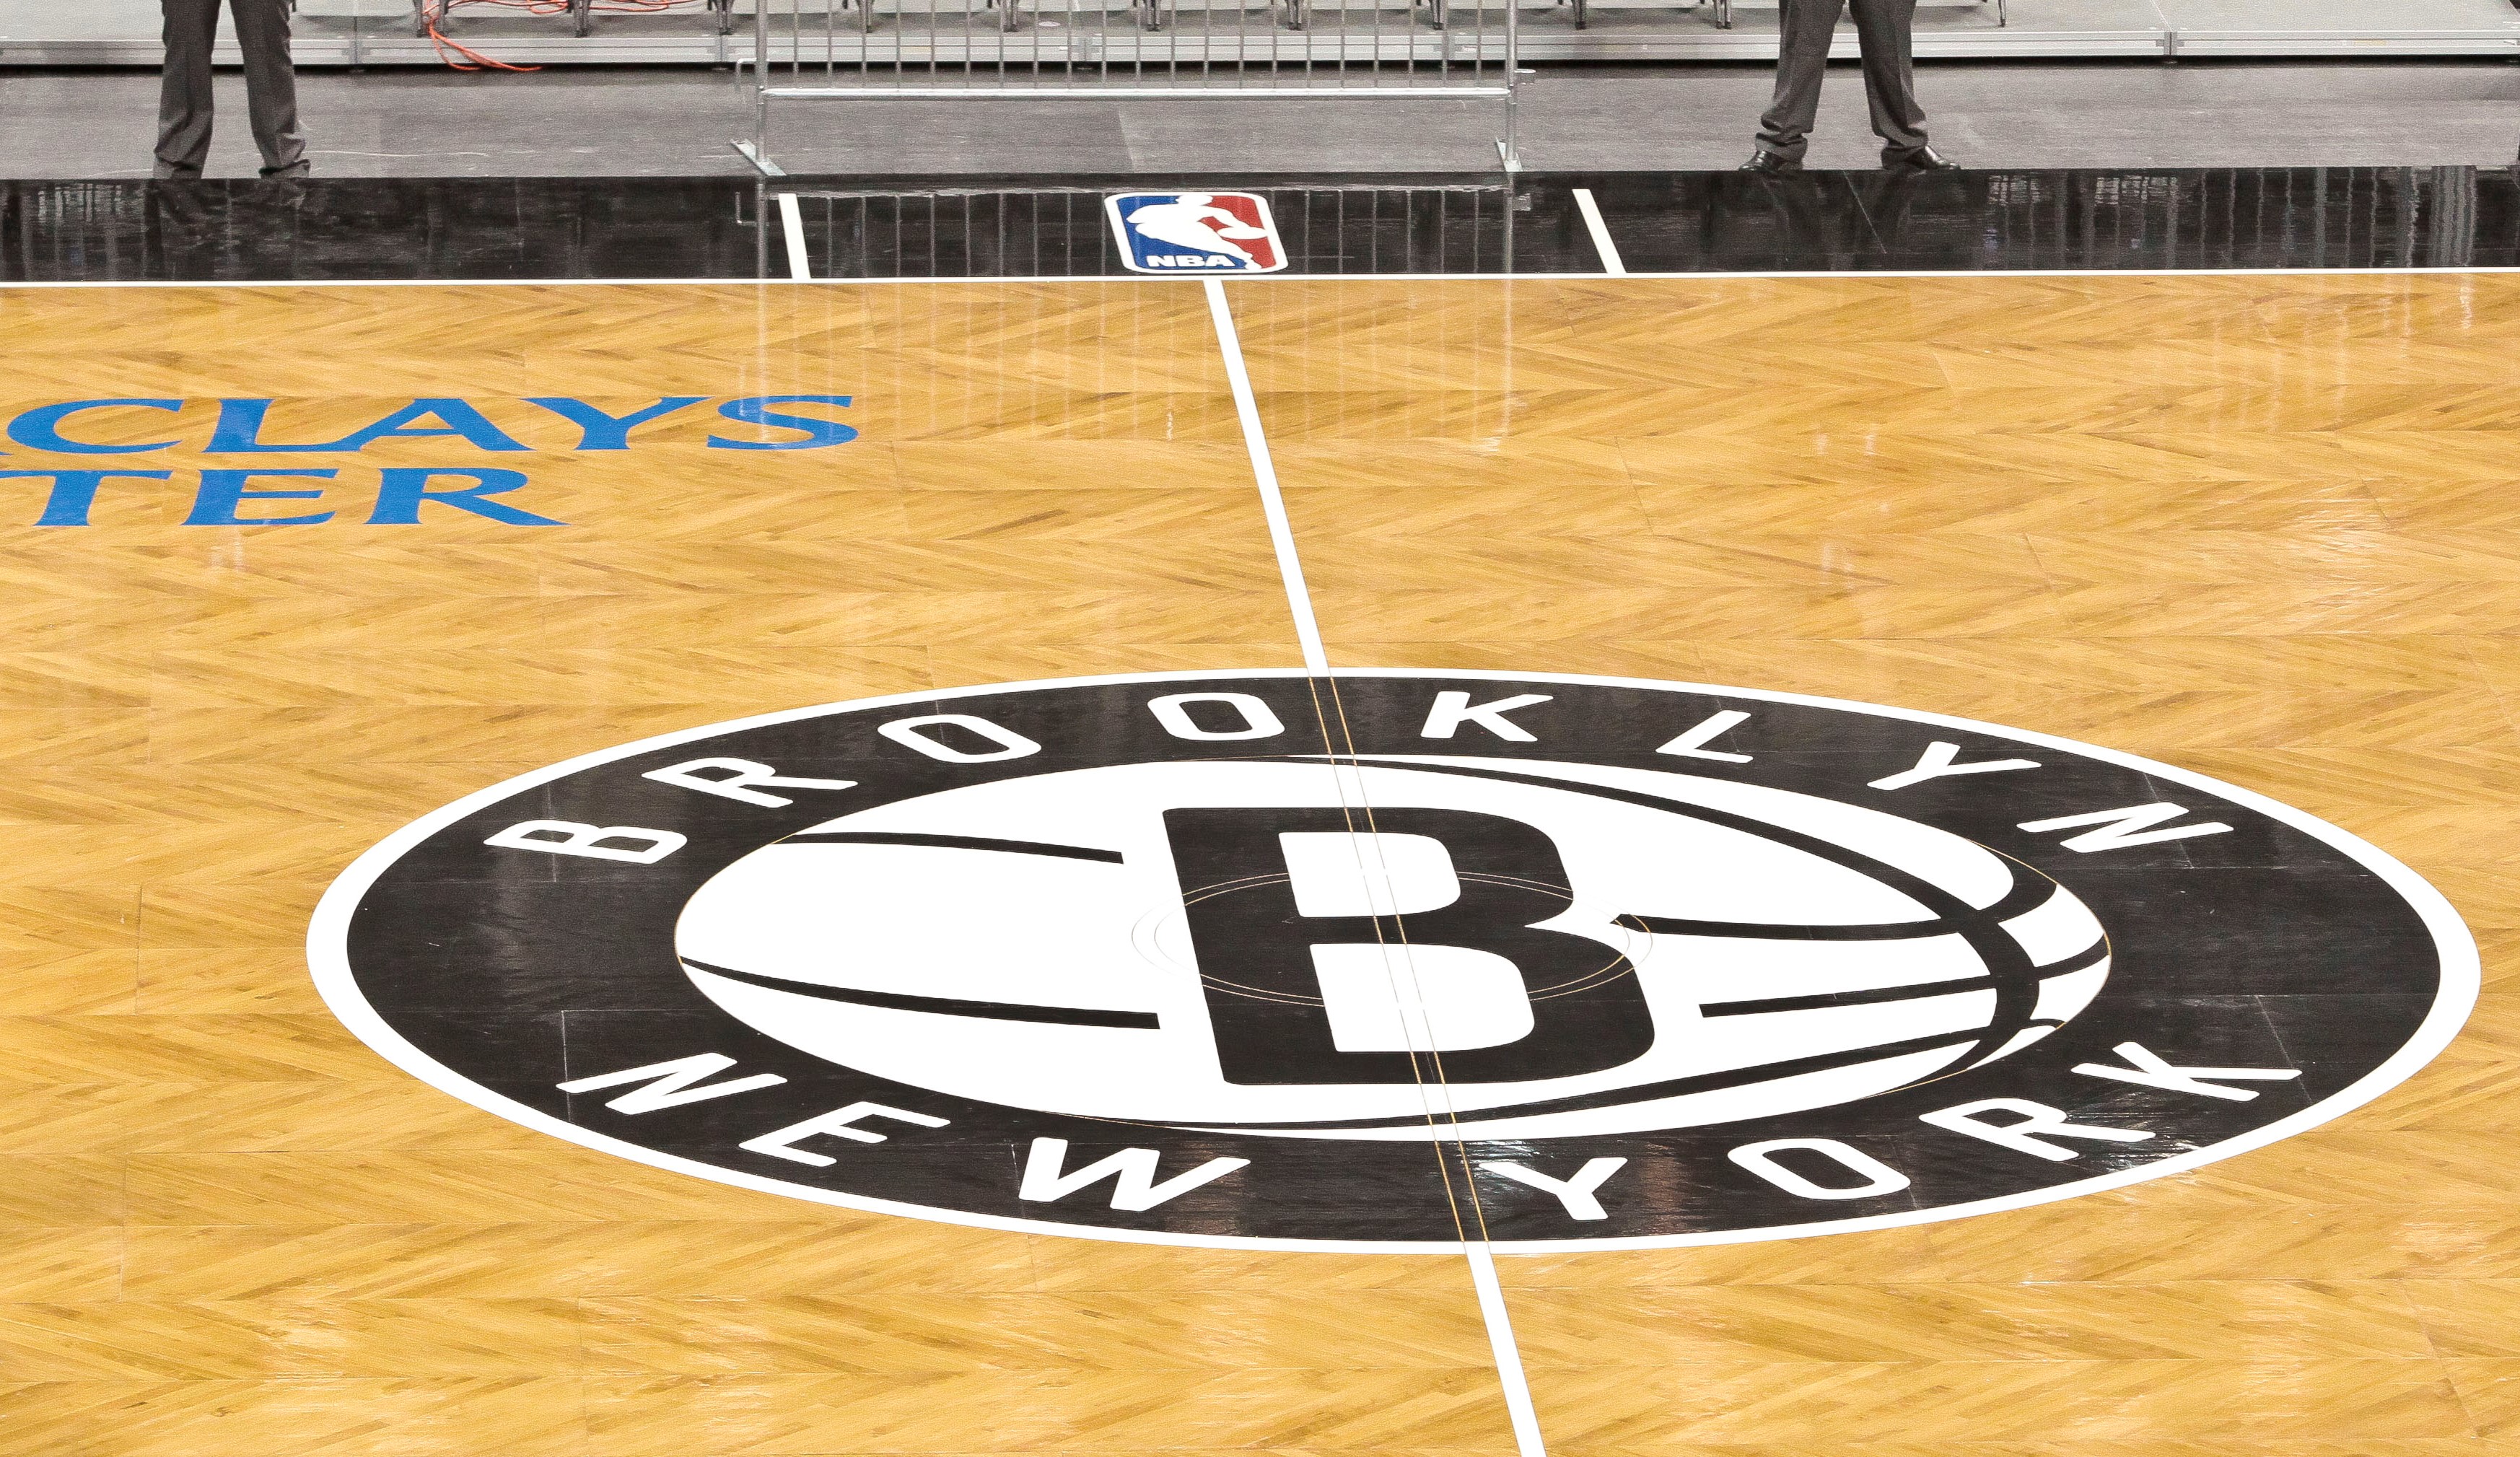 Nba Announces That Four Brooklyn Nets Players Have Tested Positive For Covid 19 Pennlive Com